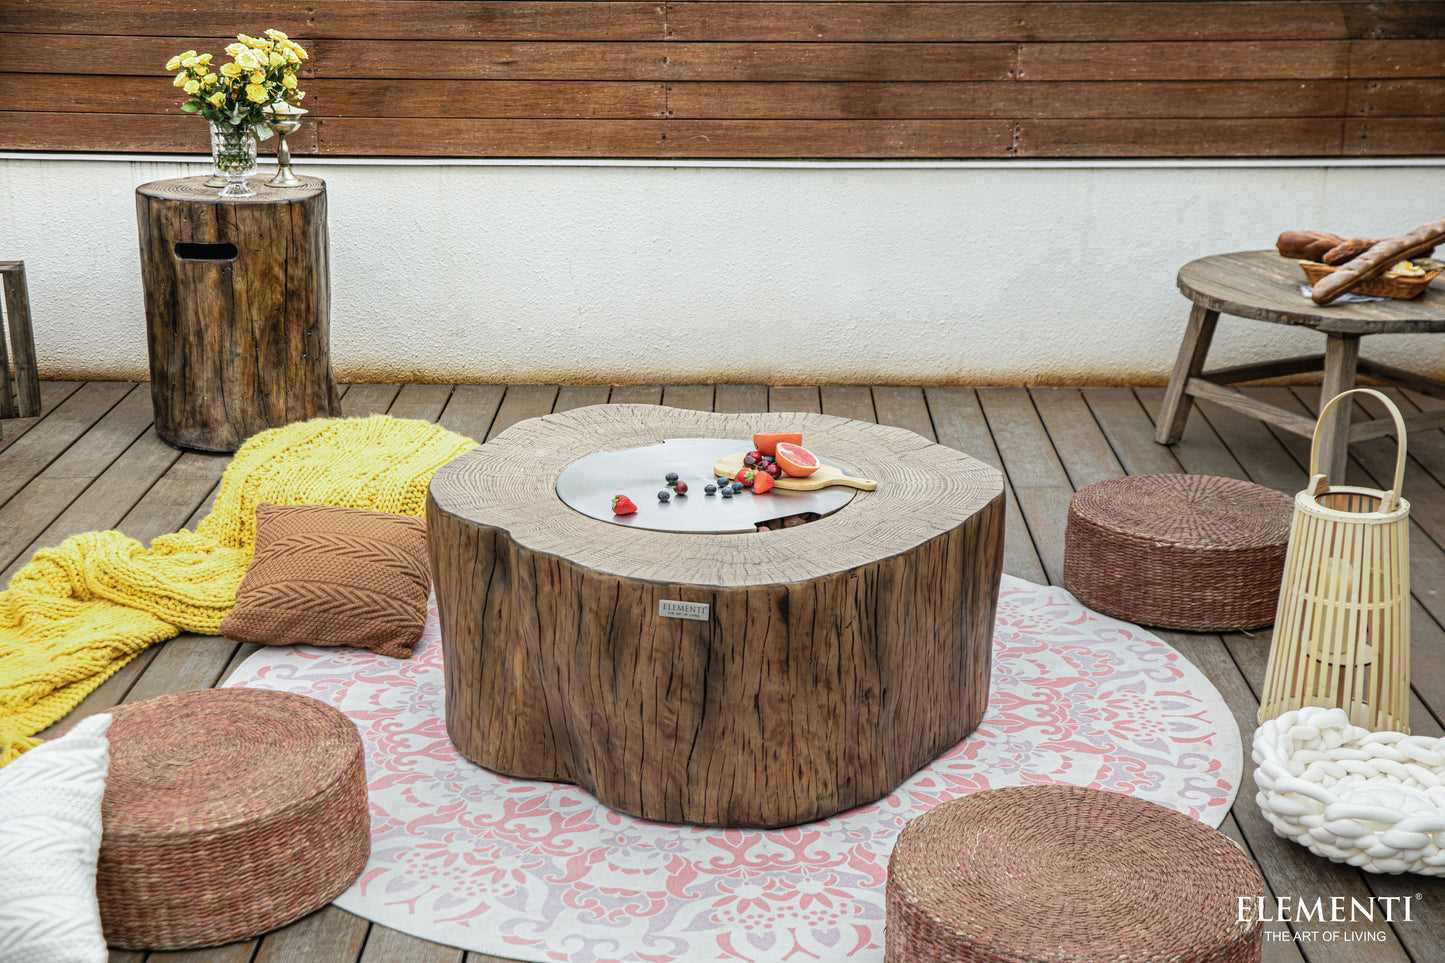 Manchester Natural Wood Concrete Fire Pit Table